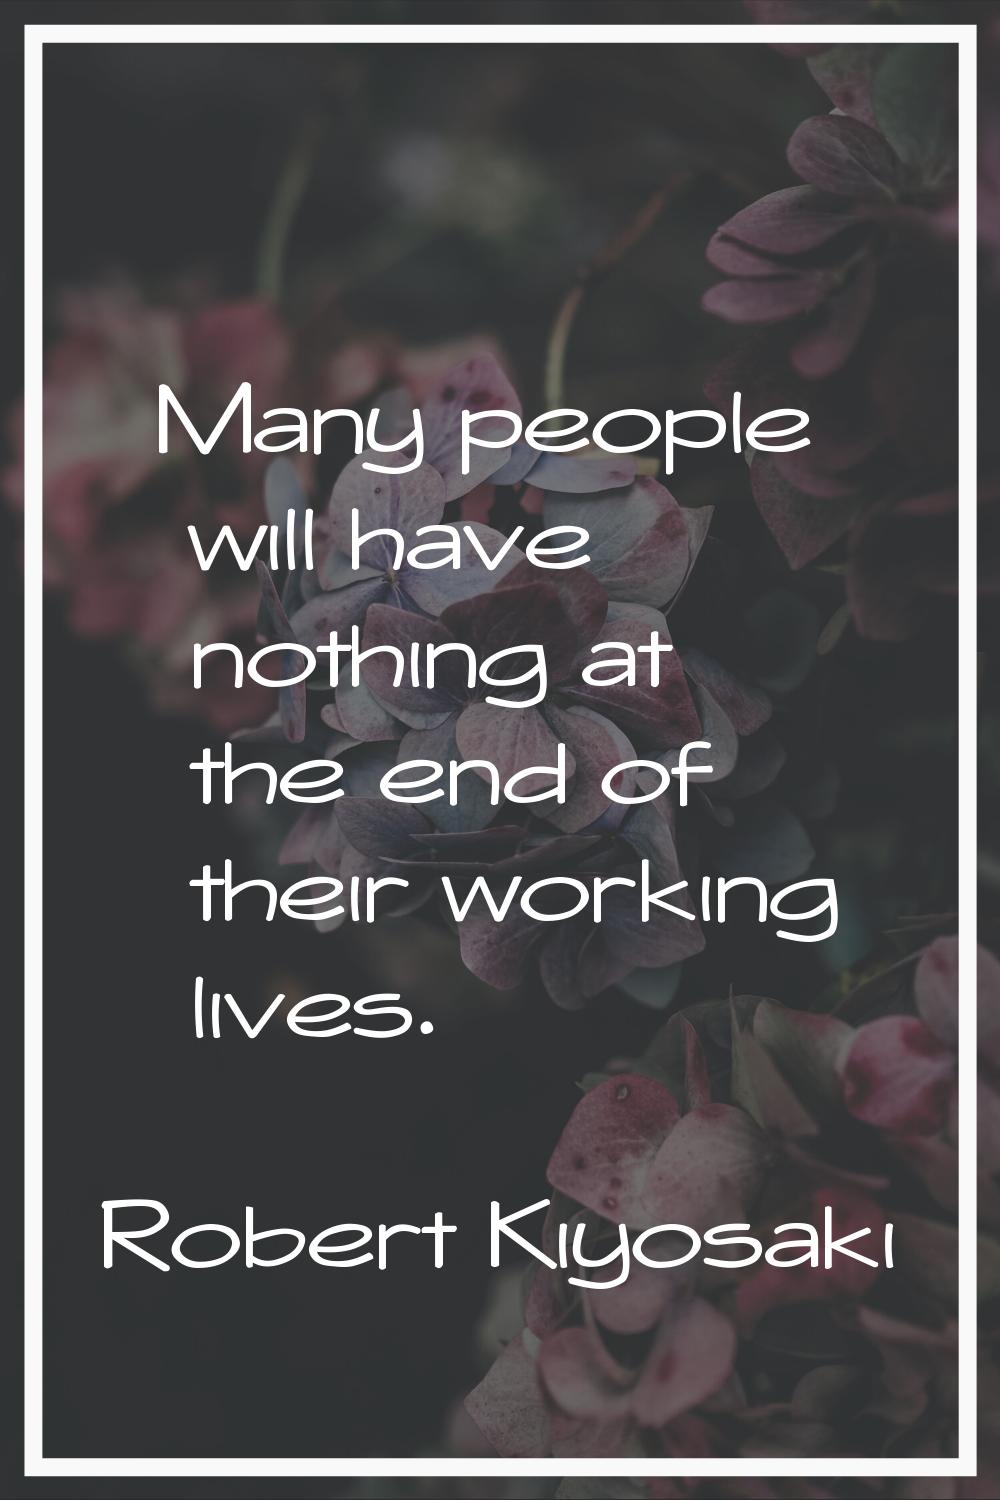 Many people will have nothing at the end of their working lives.